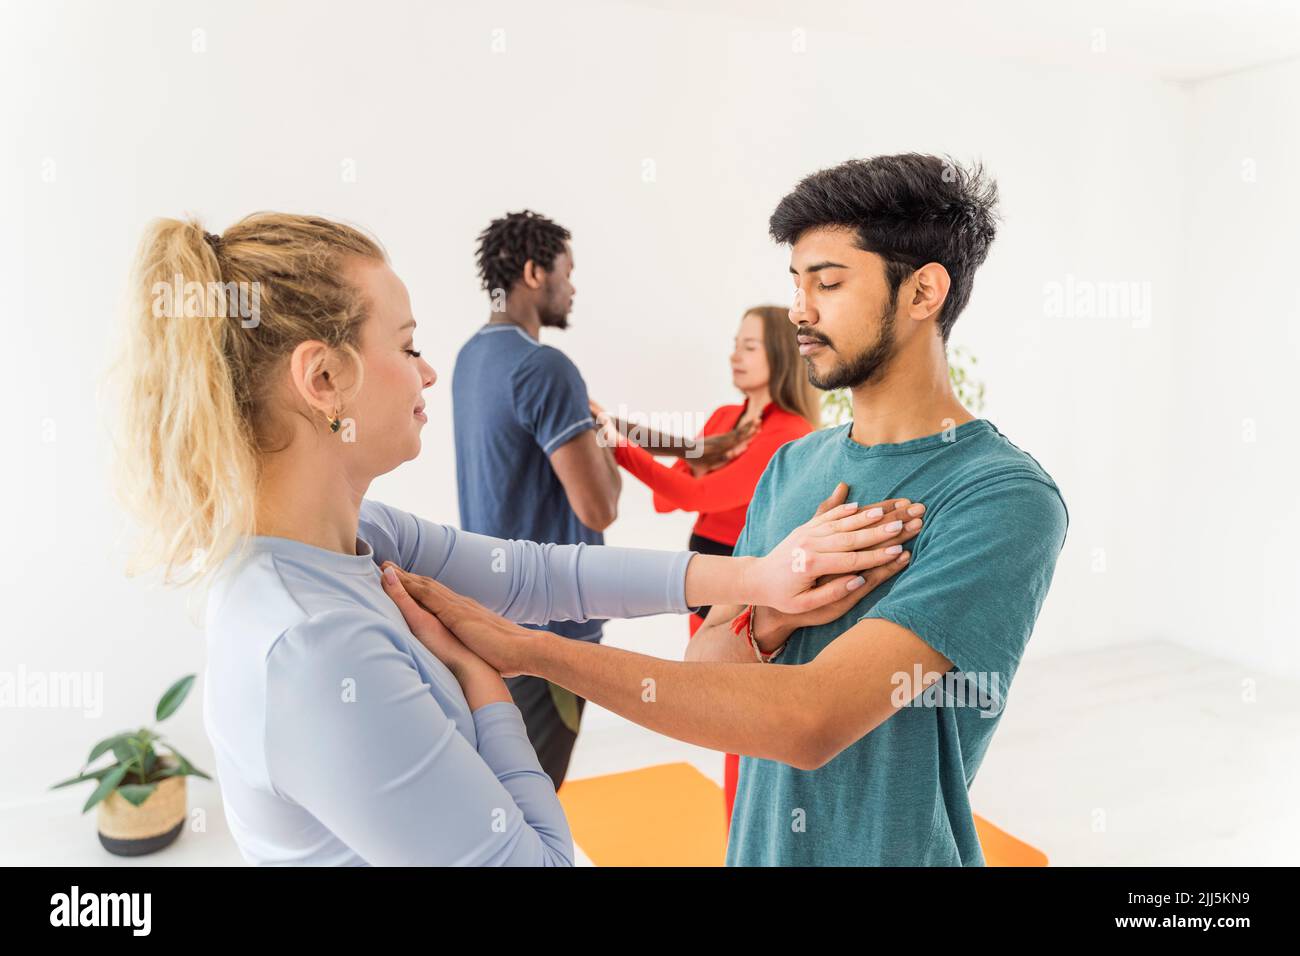 Couples with eyes closed touching chest of each other at yoga studio Stock Photo